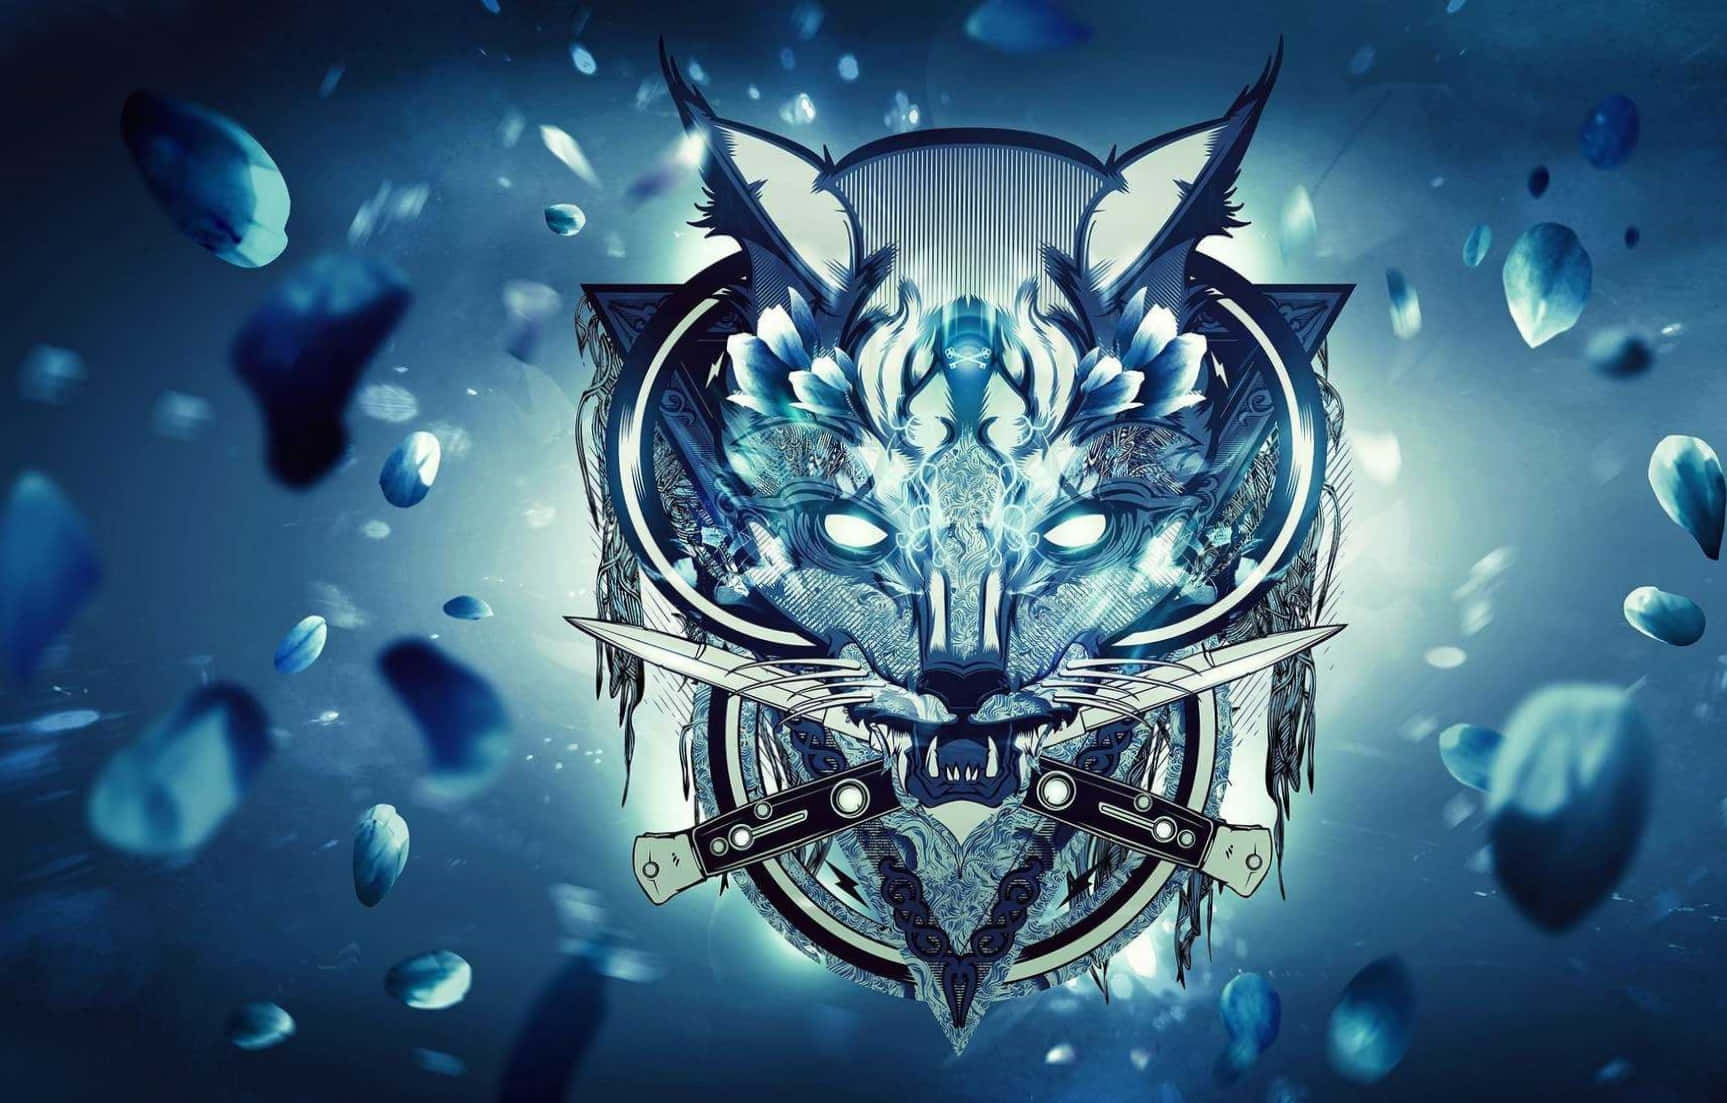 Blue Fire Wolf Holding Knife On Its Mouth Wallpaper